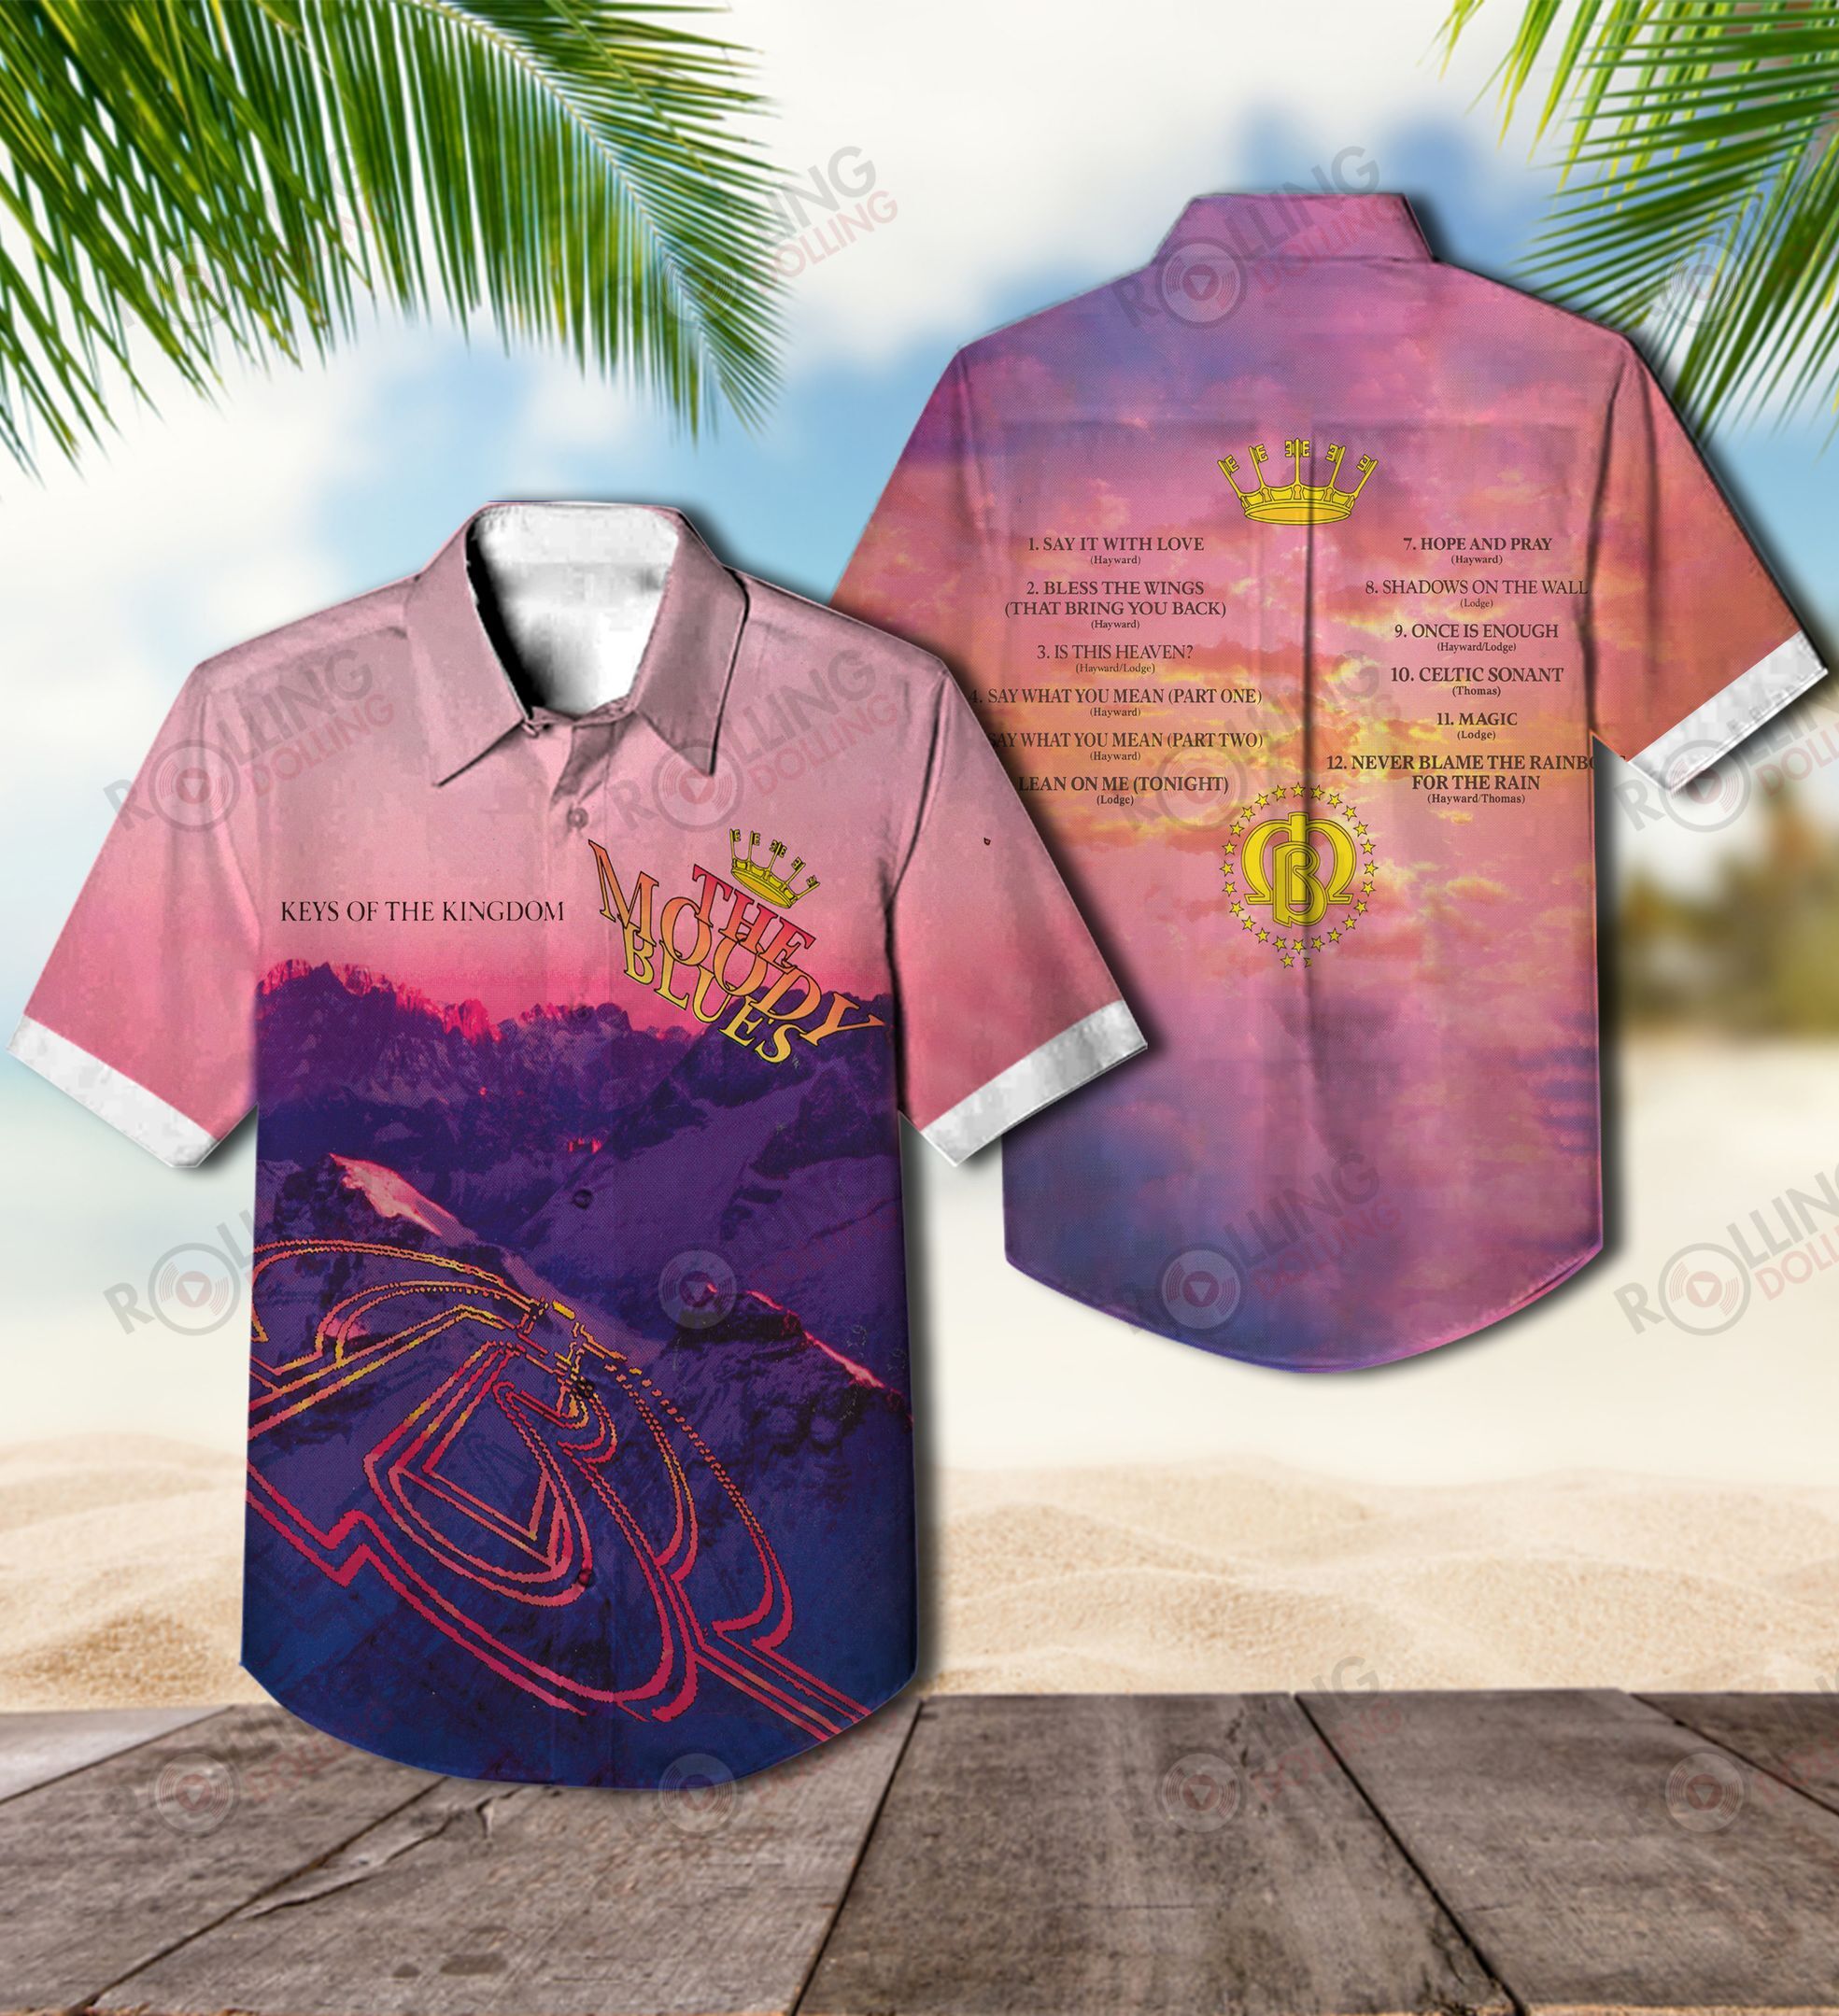 Check out these top 100+ Hawaiian shirt so cool for rock fans 133